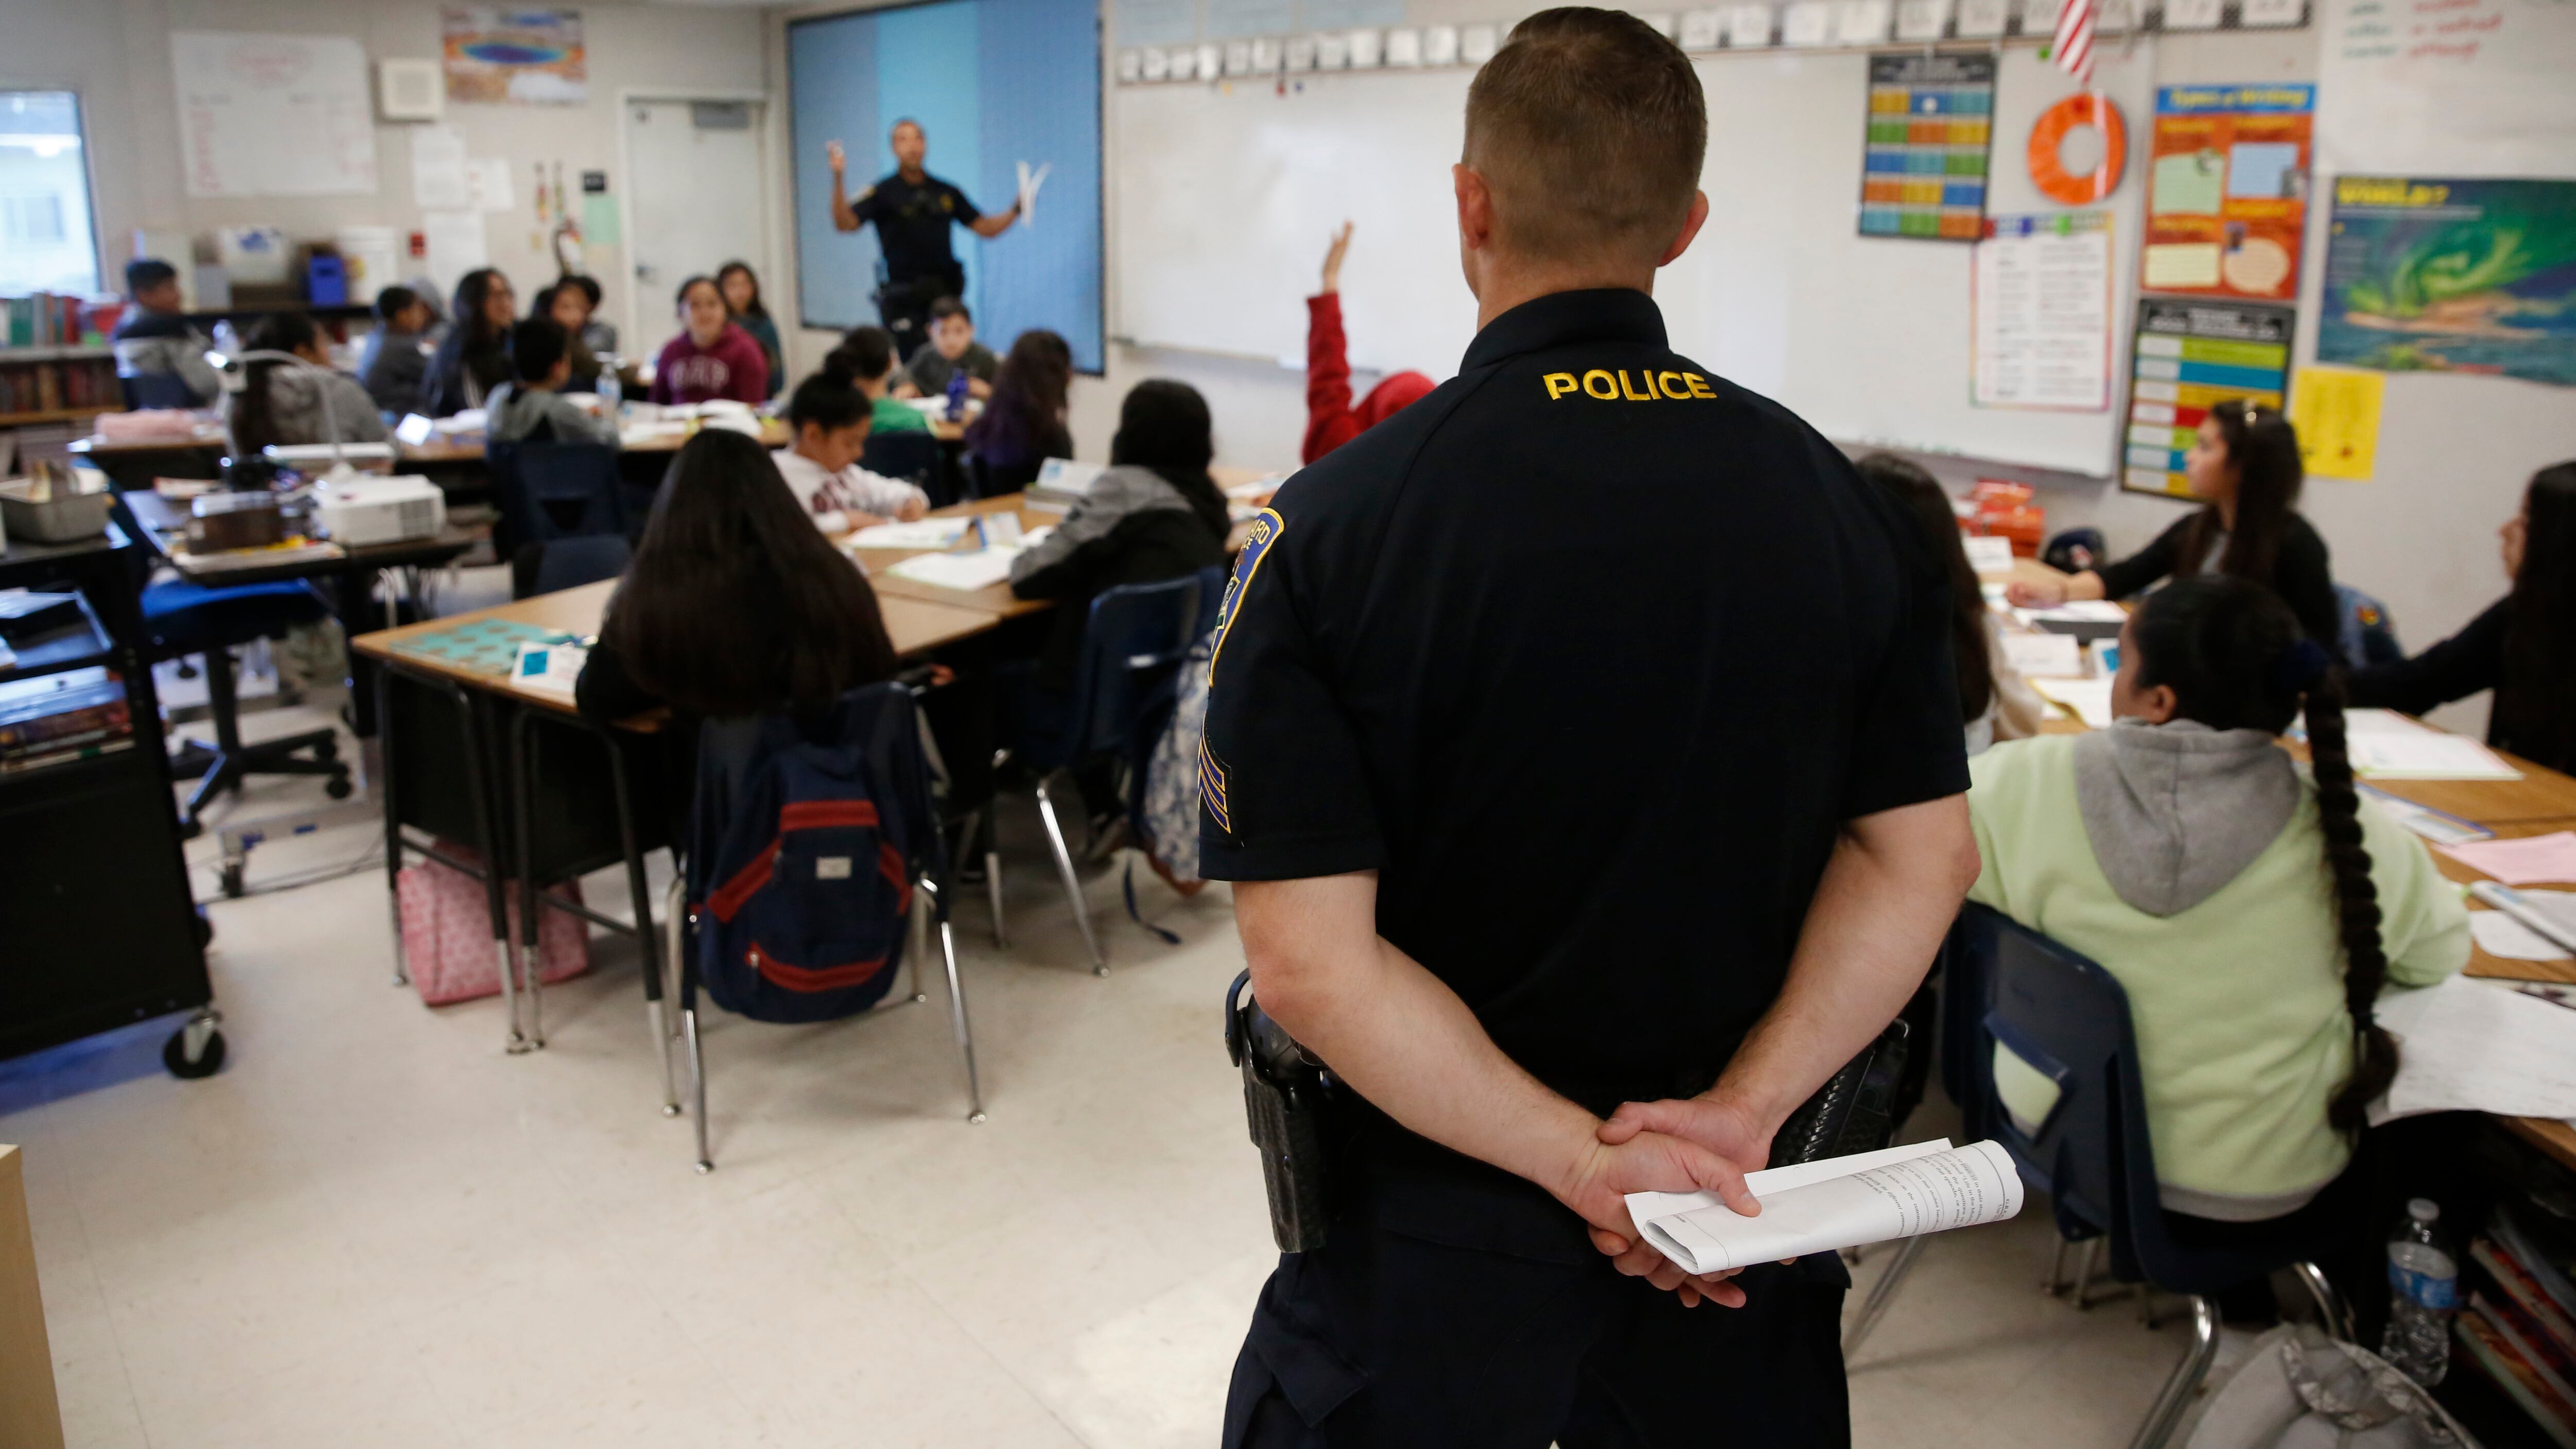 A police officer stands at the edge of a classroom, where several students sit at their desks as a teacher conducts a lesson for the students.